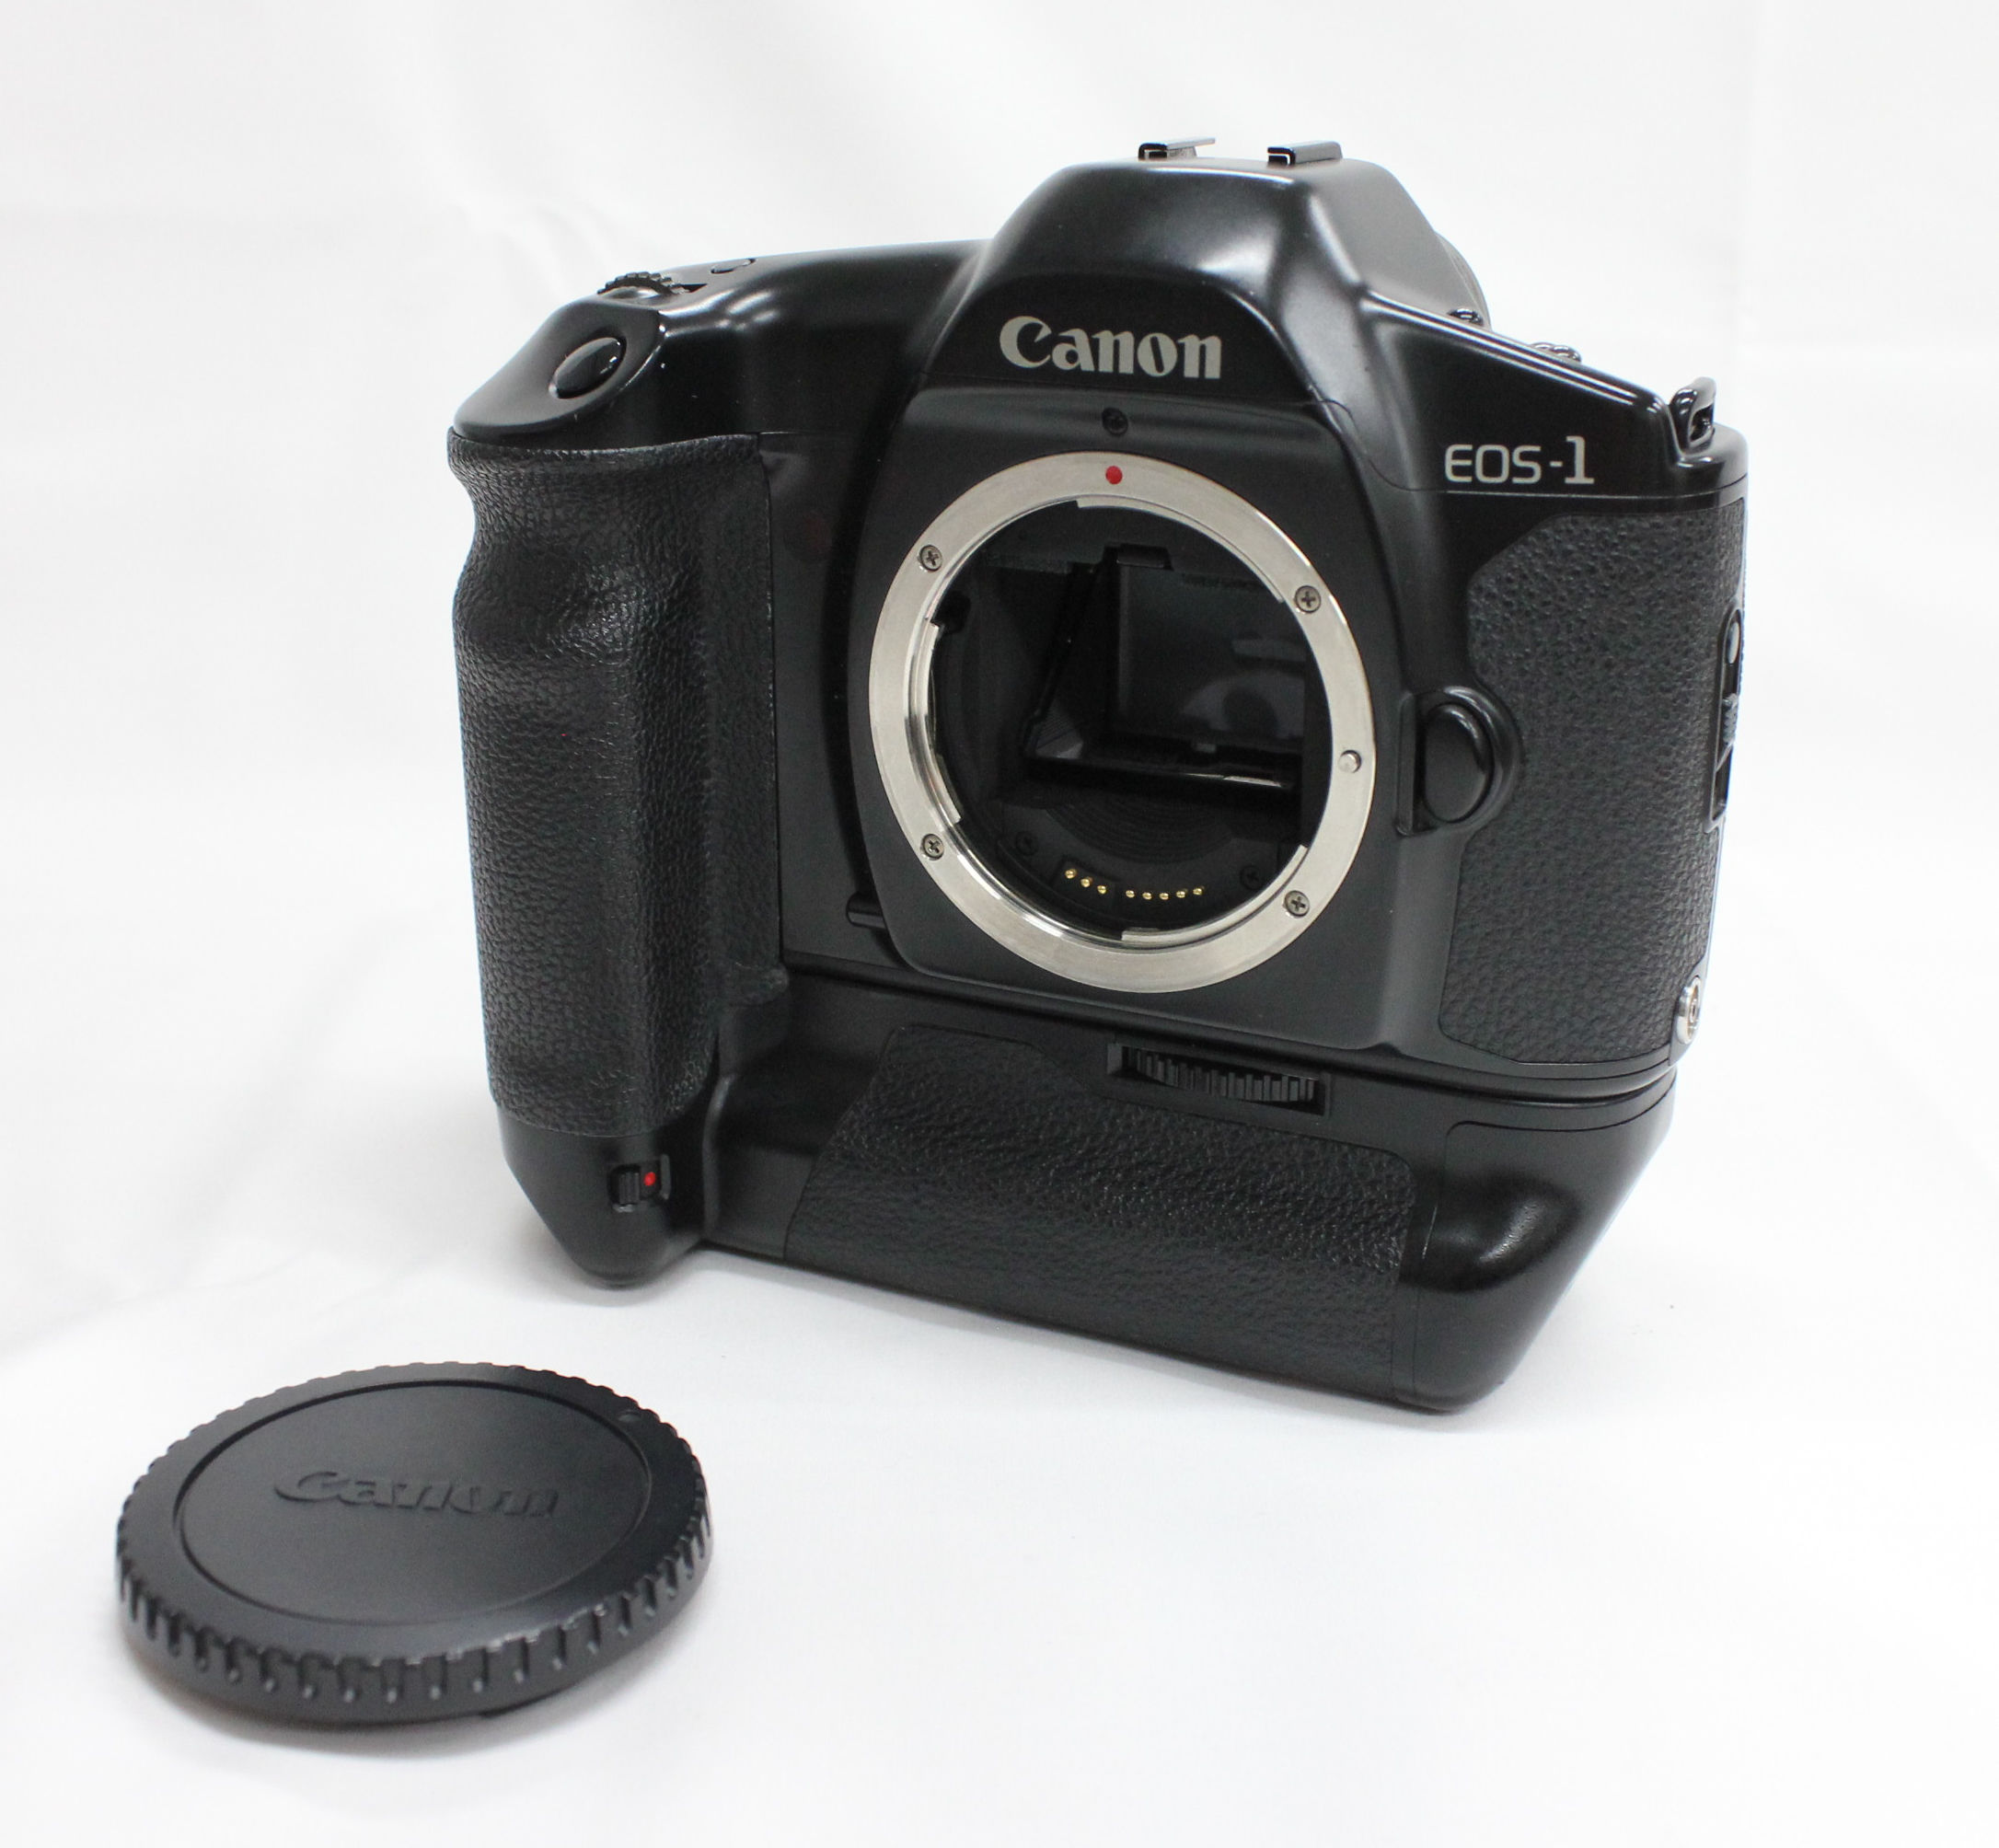 Japan Used Camera Shop | [Near Mint] Canon EOS-1 HS 35mm SLR Film Camera Body w/ Power Drive Booster E1 from Japan